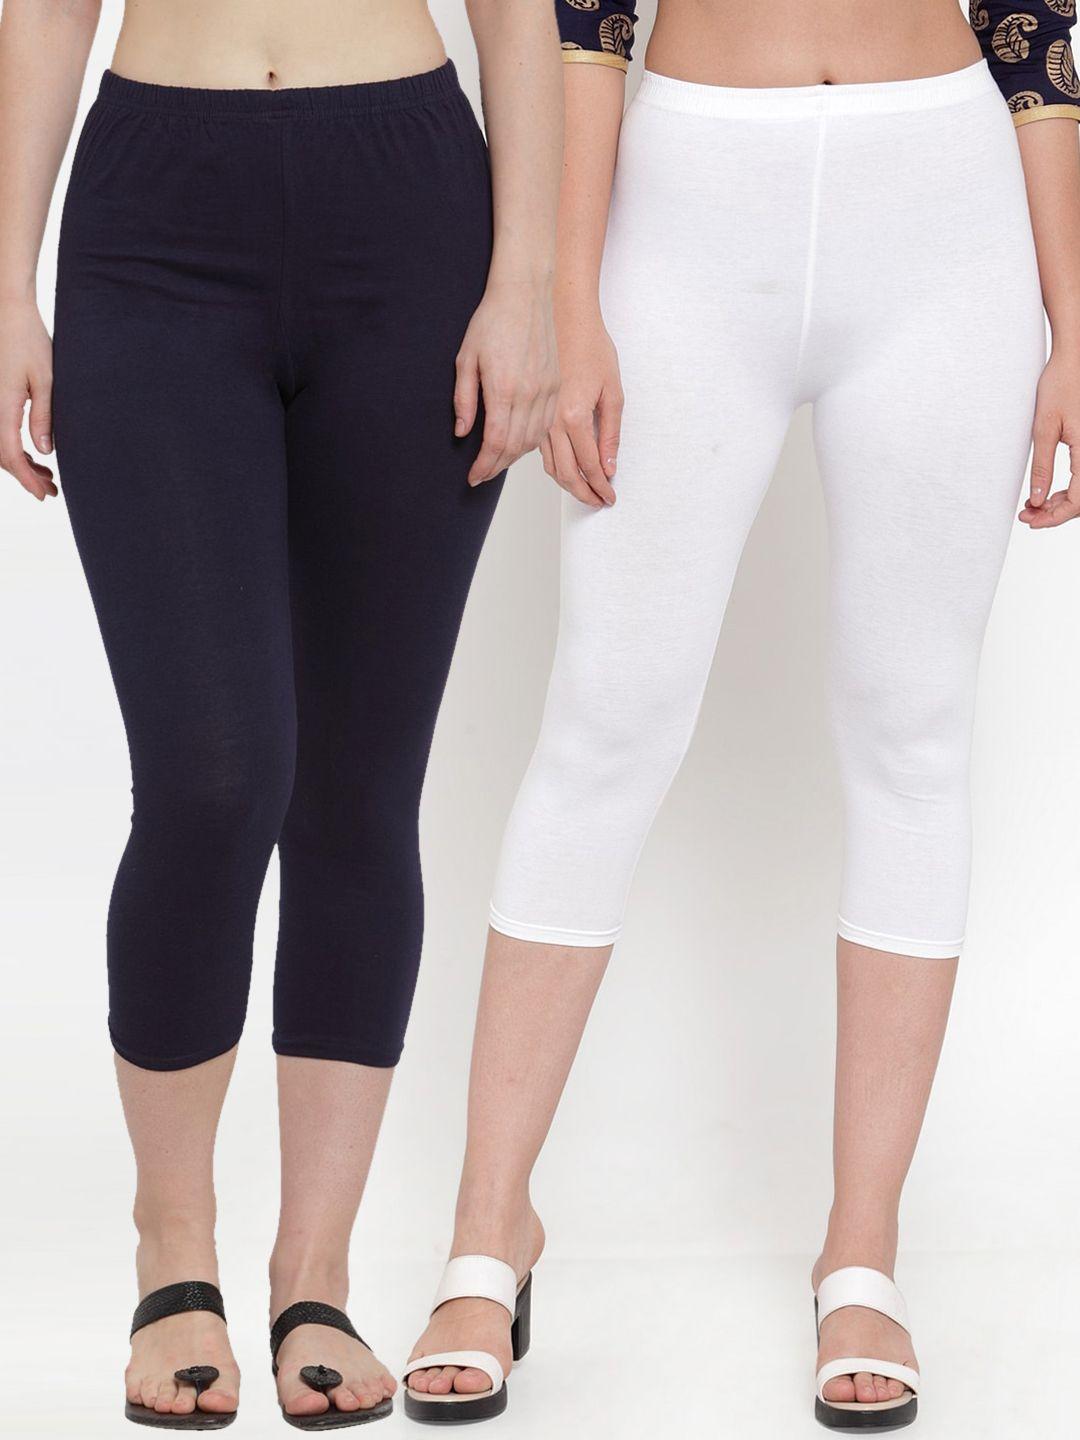 gracit women pack of 2 white & navy blue solid capris